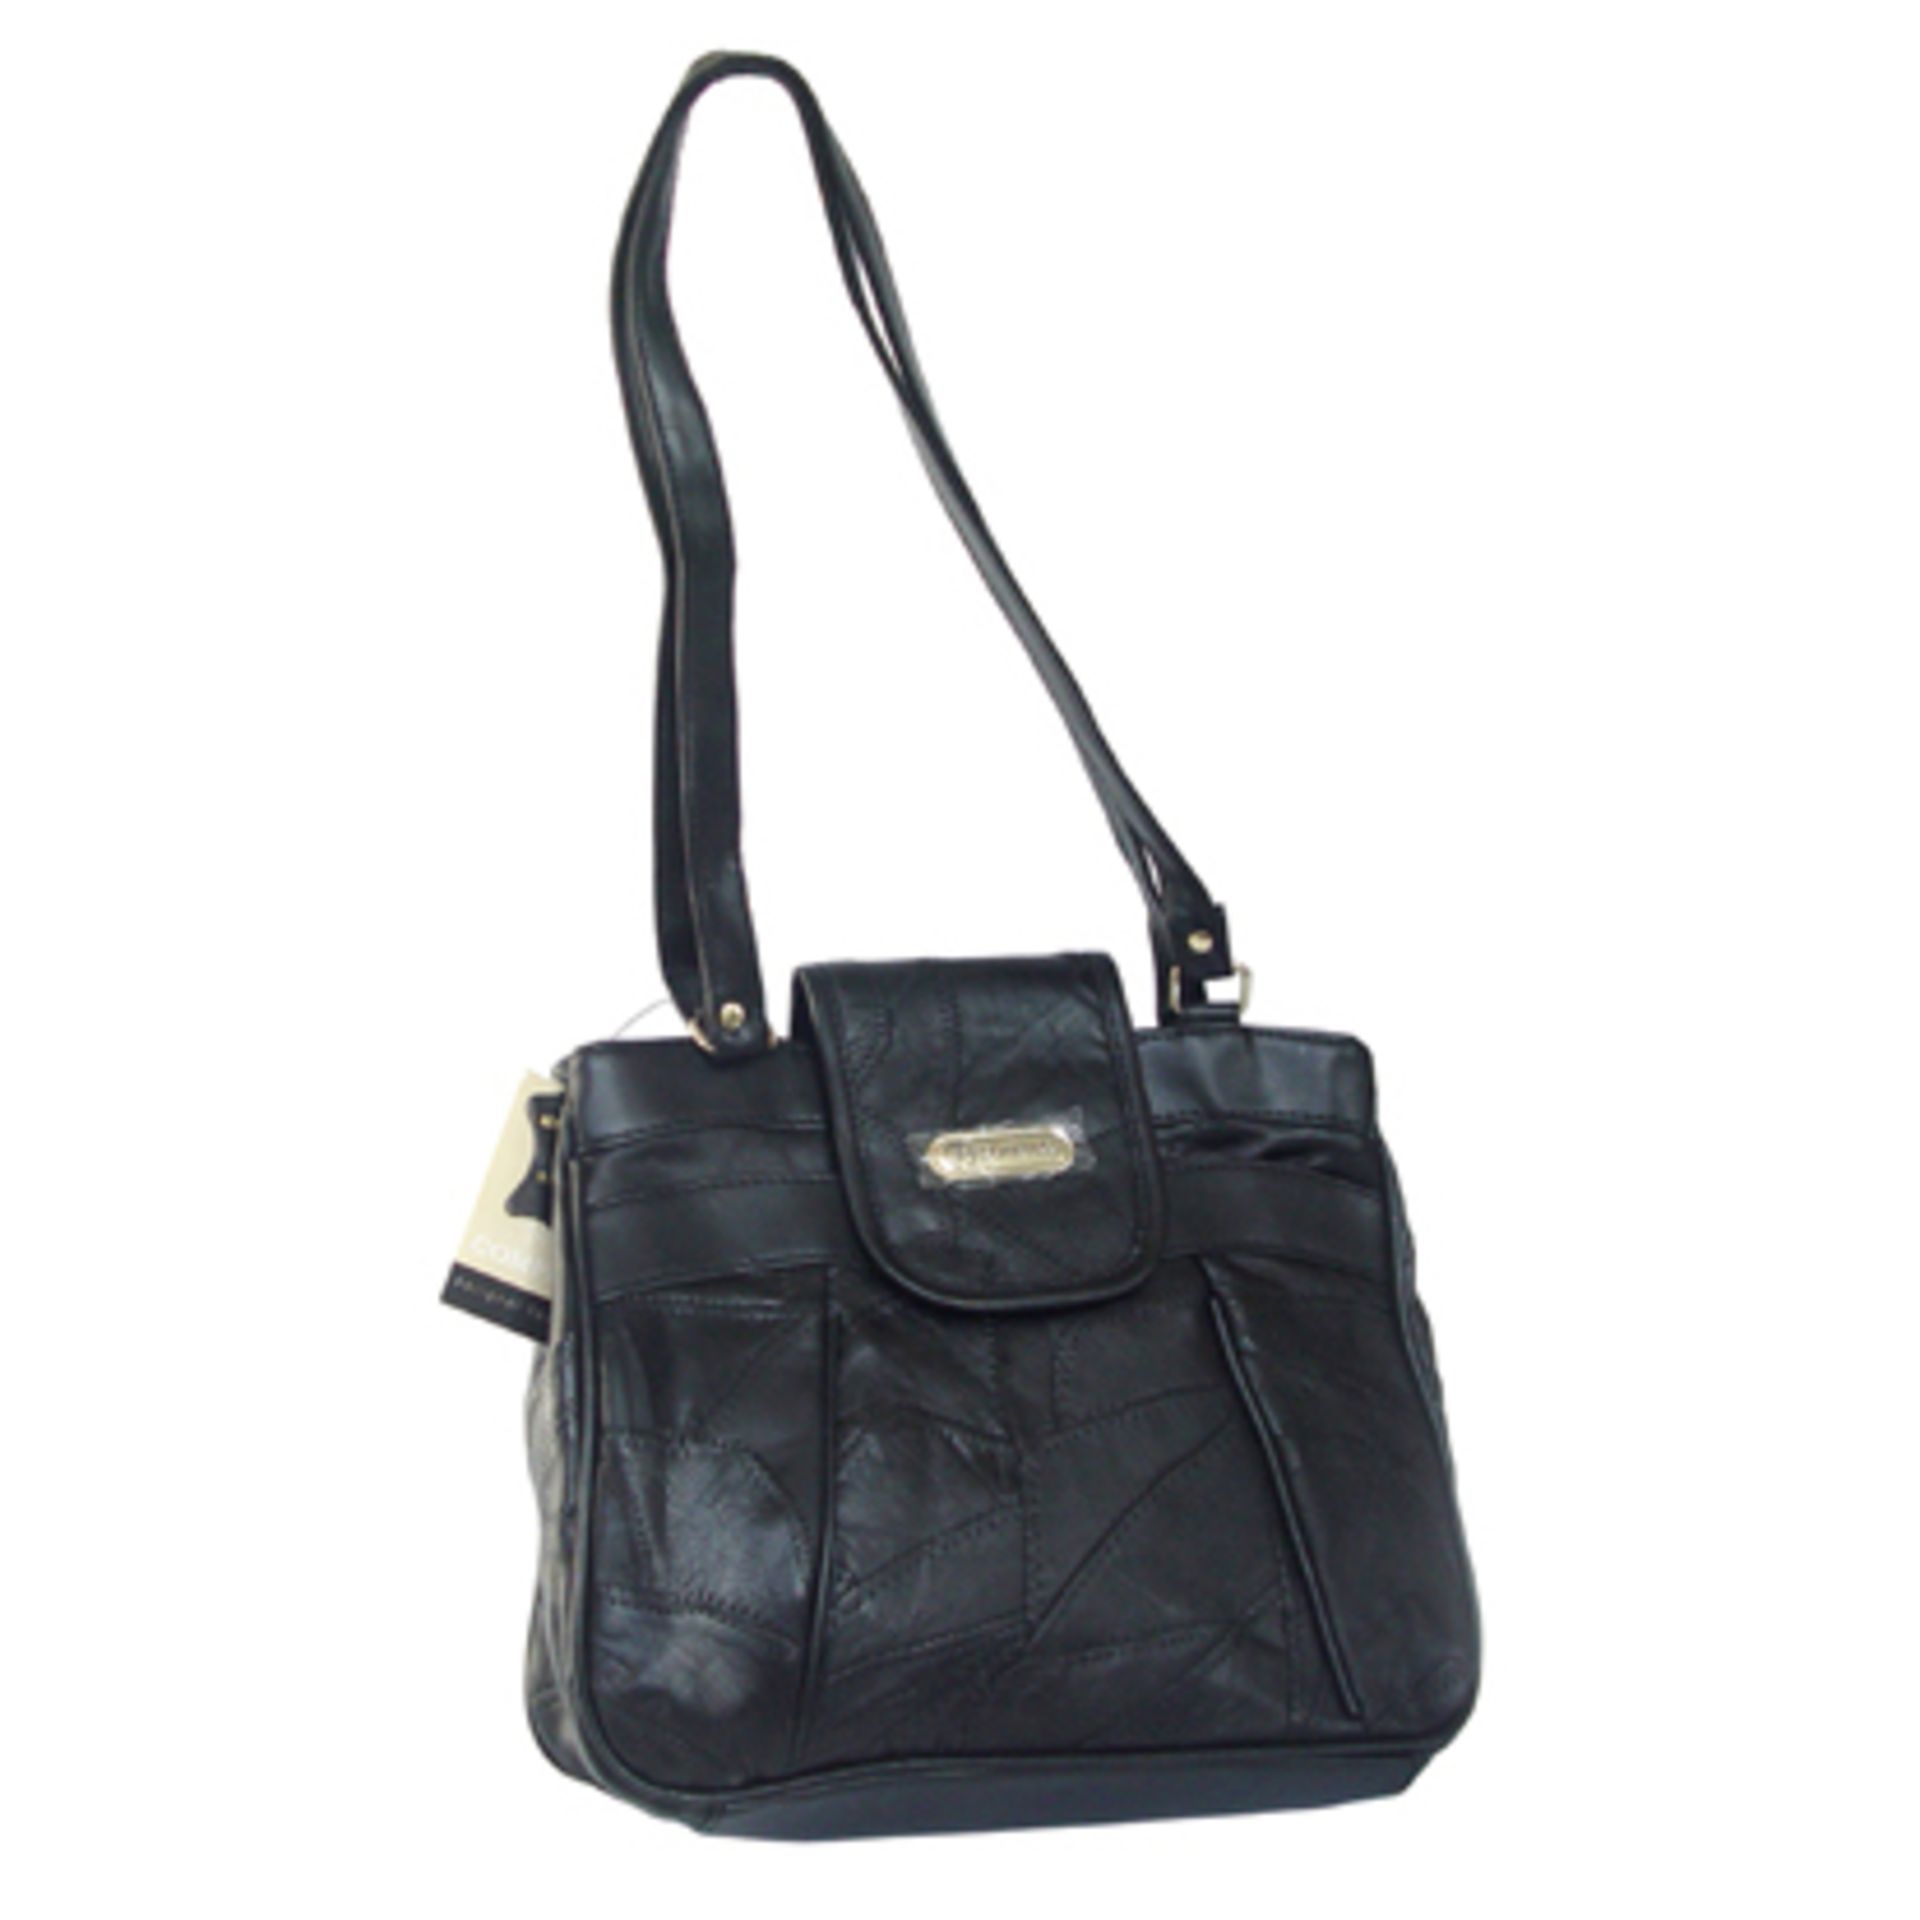 V *TRADE QTY* Brand New Leather Ladies Black Handbag with shoulder strap X 5 YOUR BID PRICE TO BE